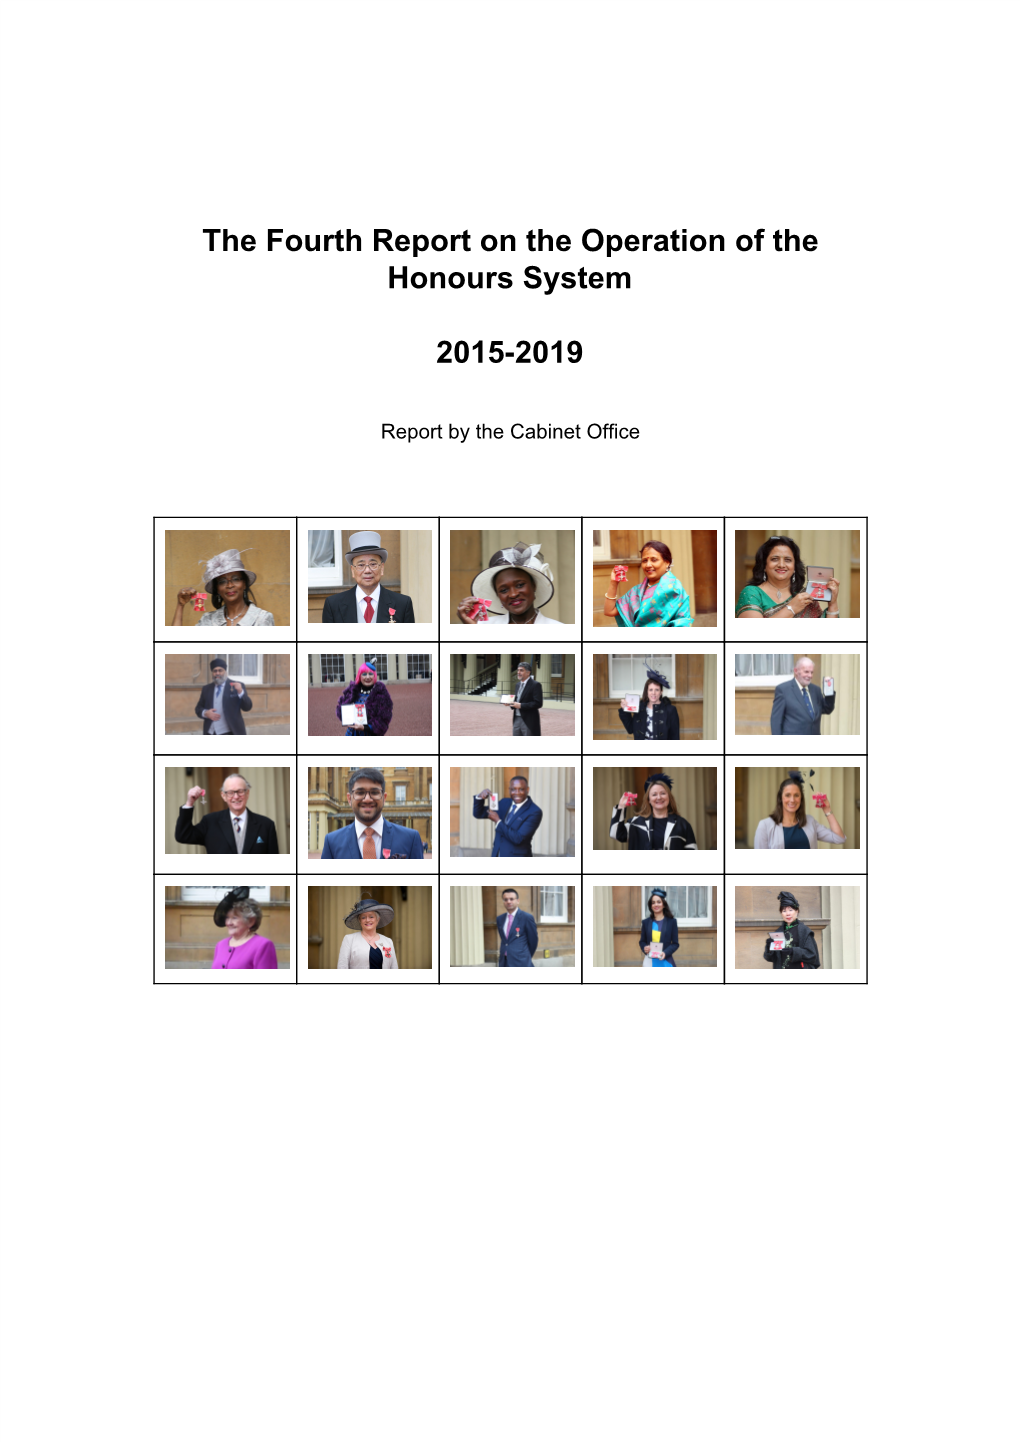 The Fourth Report on the Operation of the Honours System 2015-2019